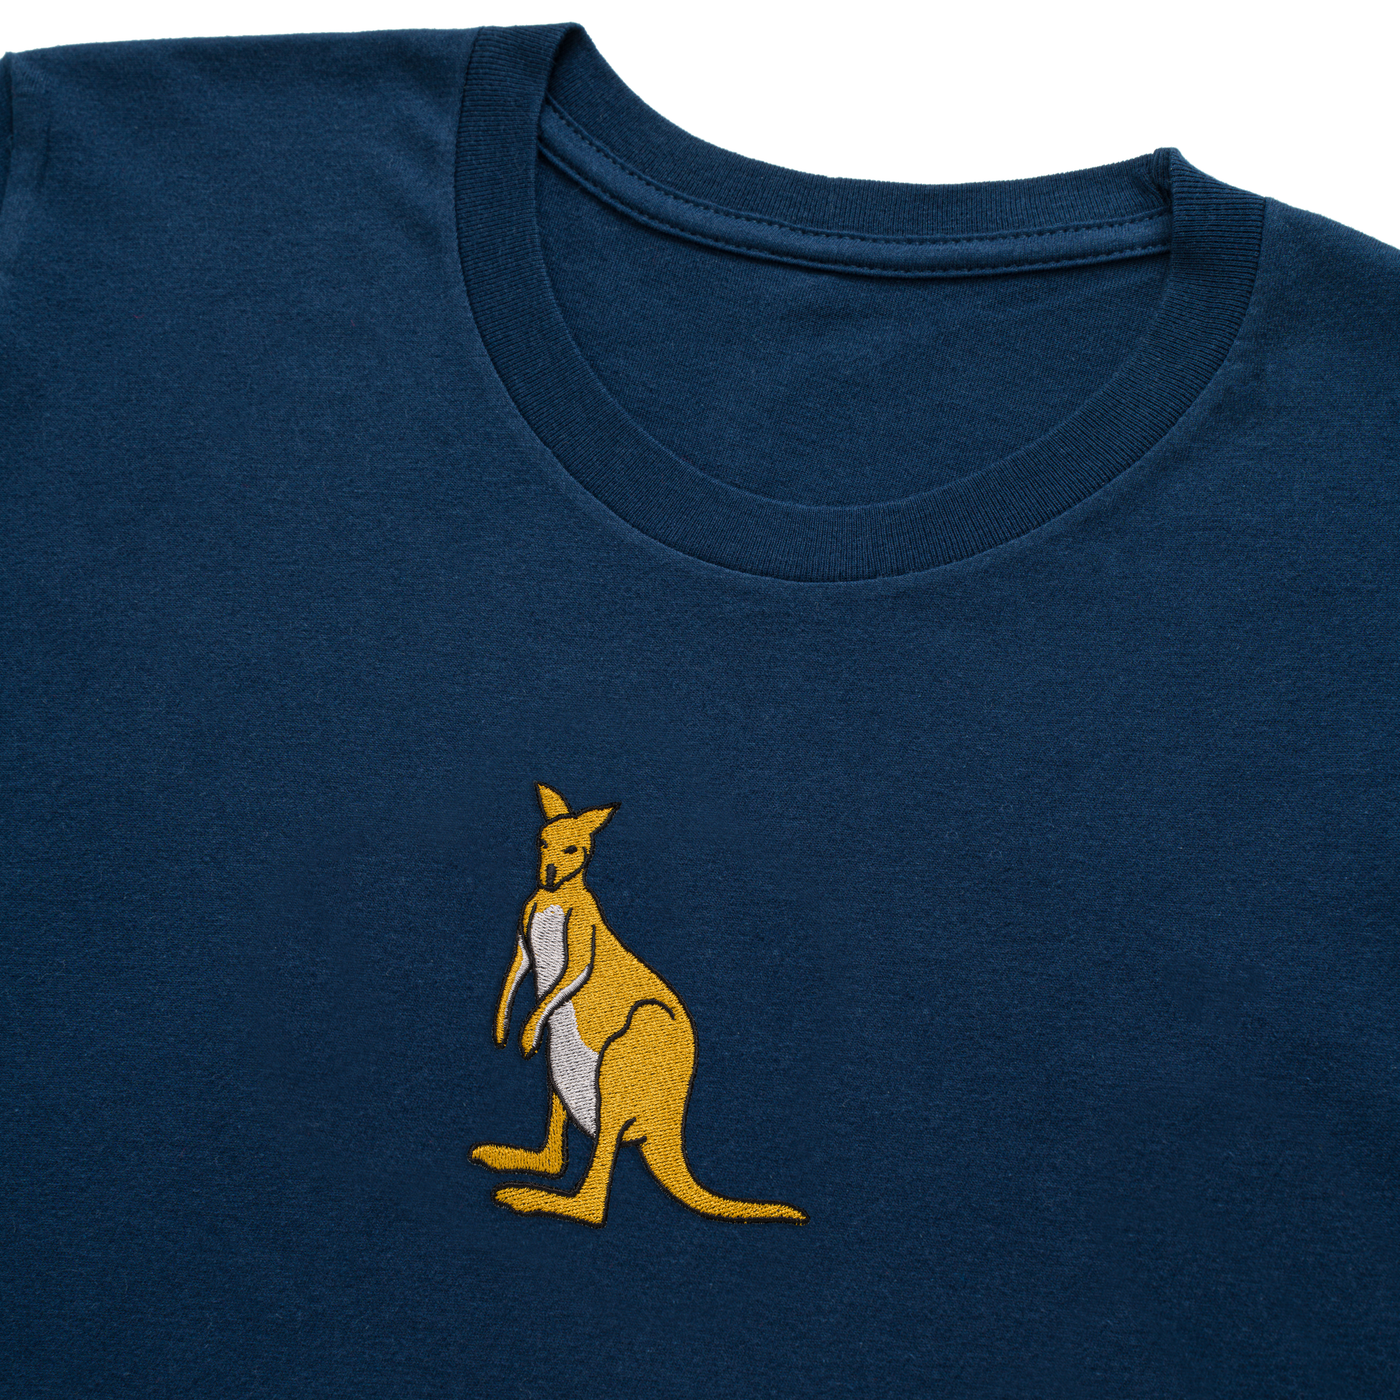 Bobby's Planet Kids Embroidered Kangaroo T-Shirt from Australia Down Under Animals Collection in Navy Color#color_navy